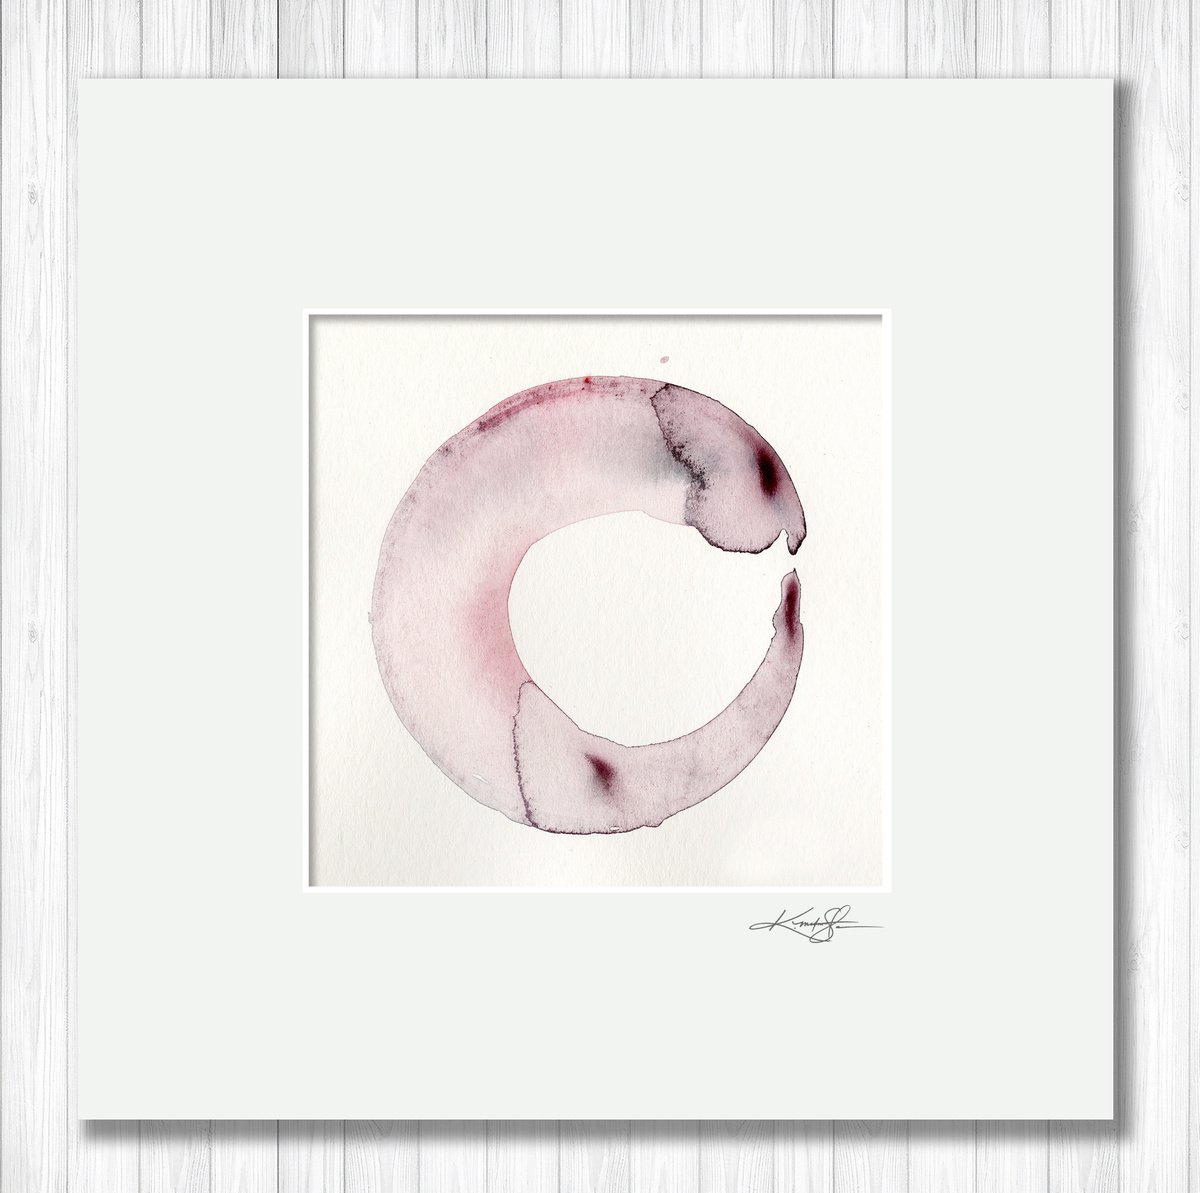 Enso Serenity 7 - Enso Abstract painting by Kathy Morton Stanion by Kathy Morton Stanion